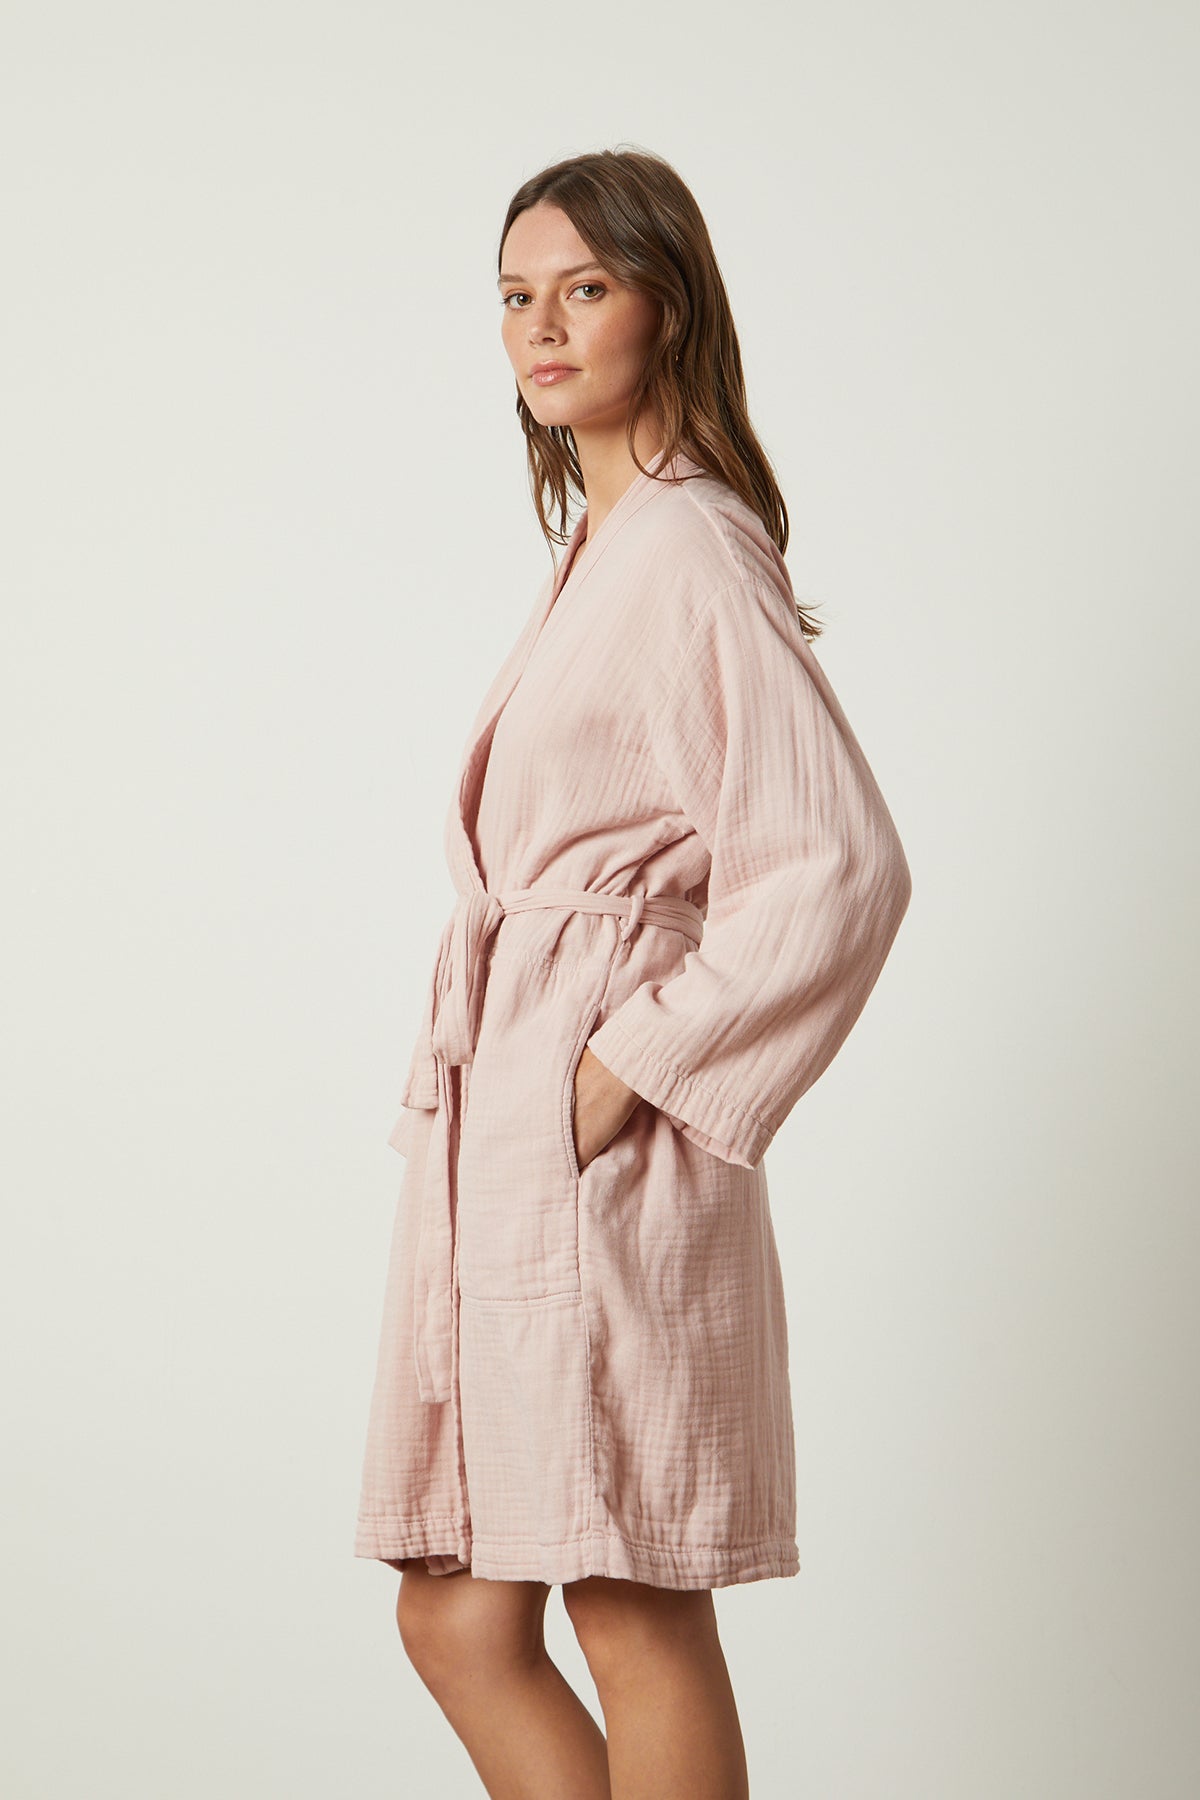 A woman wearing a soft texture pink MINI COTTON GAUZE ROBE by Jenny Graham Home.-25519664824513